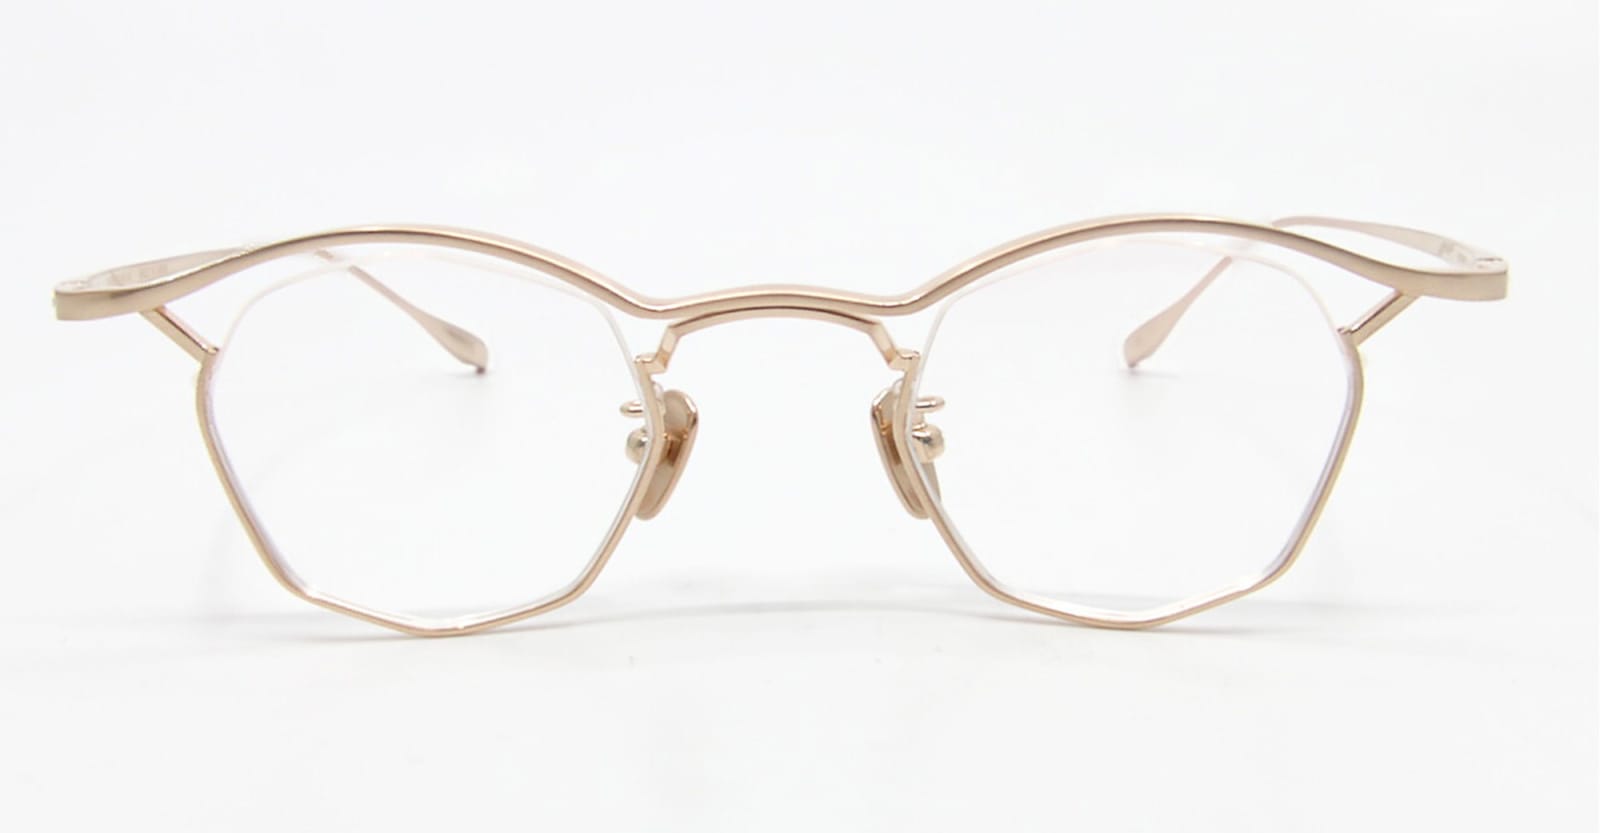 FACTORY900 Titanos X Factory900 Mf-002 - Gold Rx Glasses